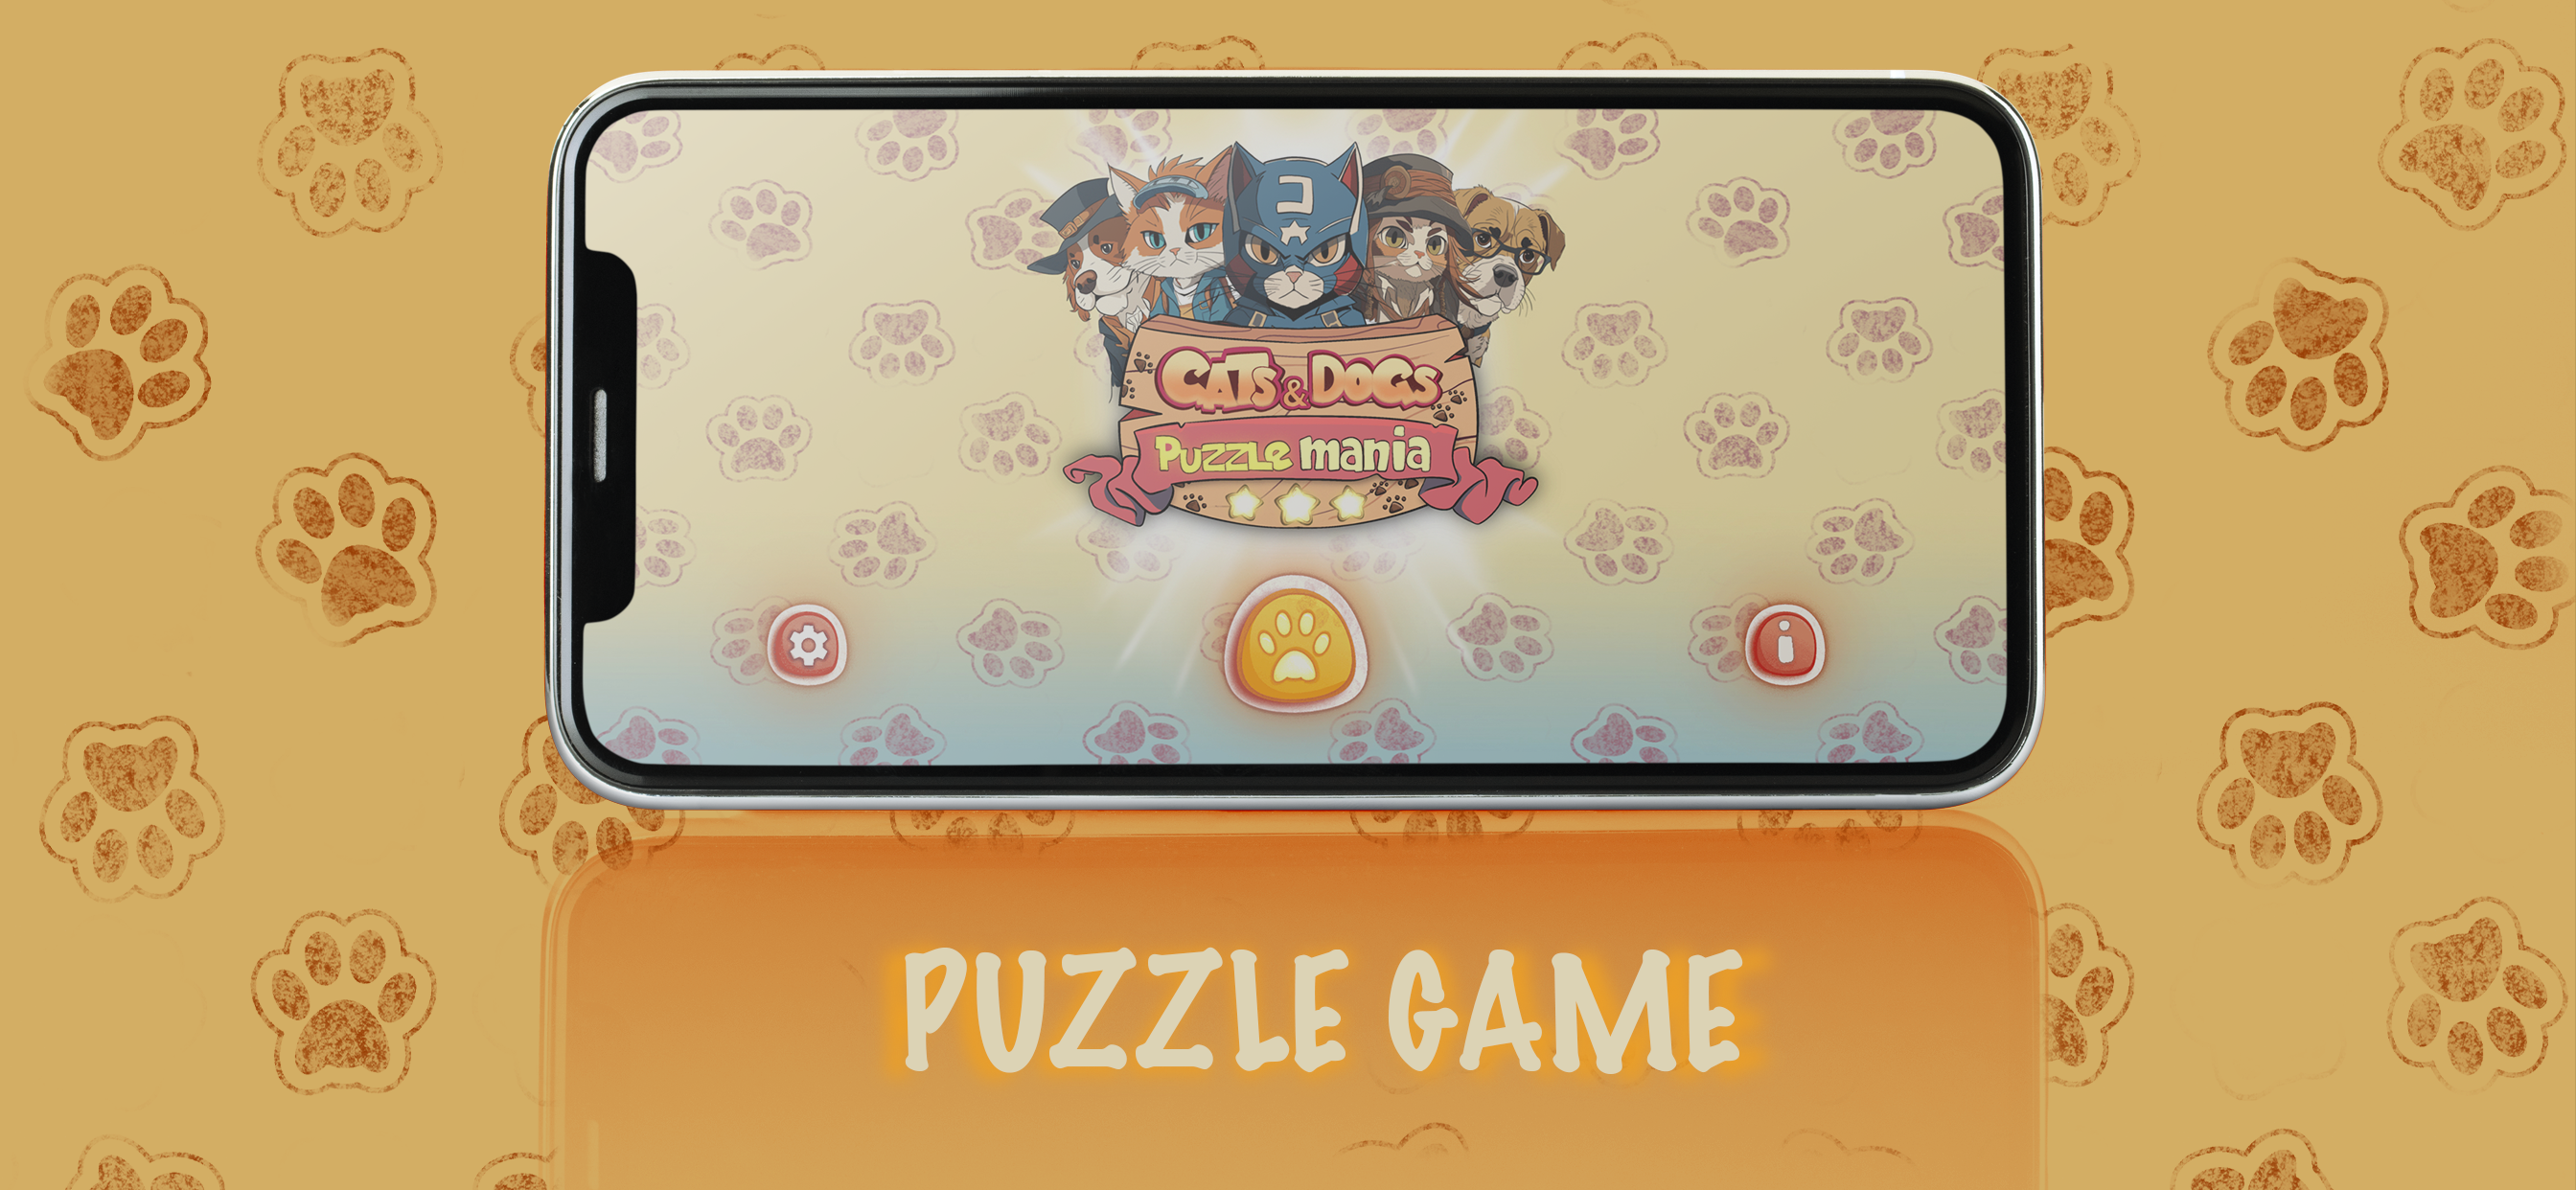 Screenshot of Cats & Dogs Puzzle Mania